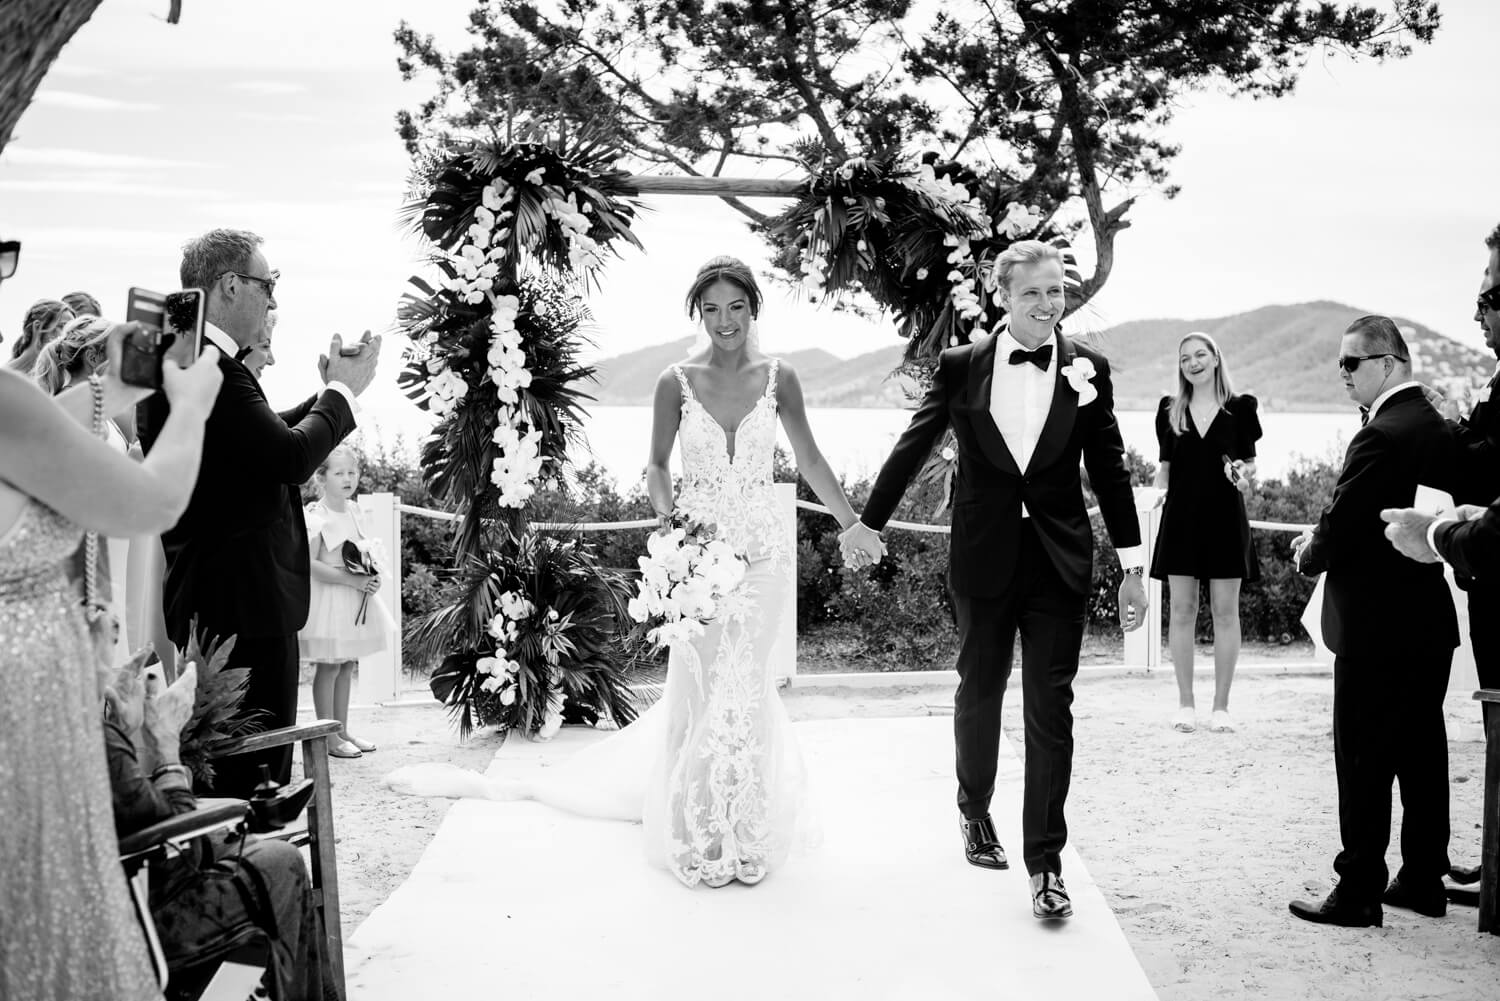 Monochrome - BnW bride and groom at Nikki beach, Ibiza just married